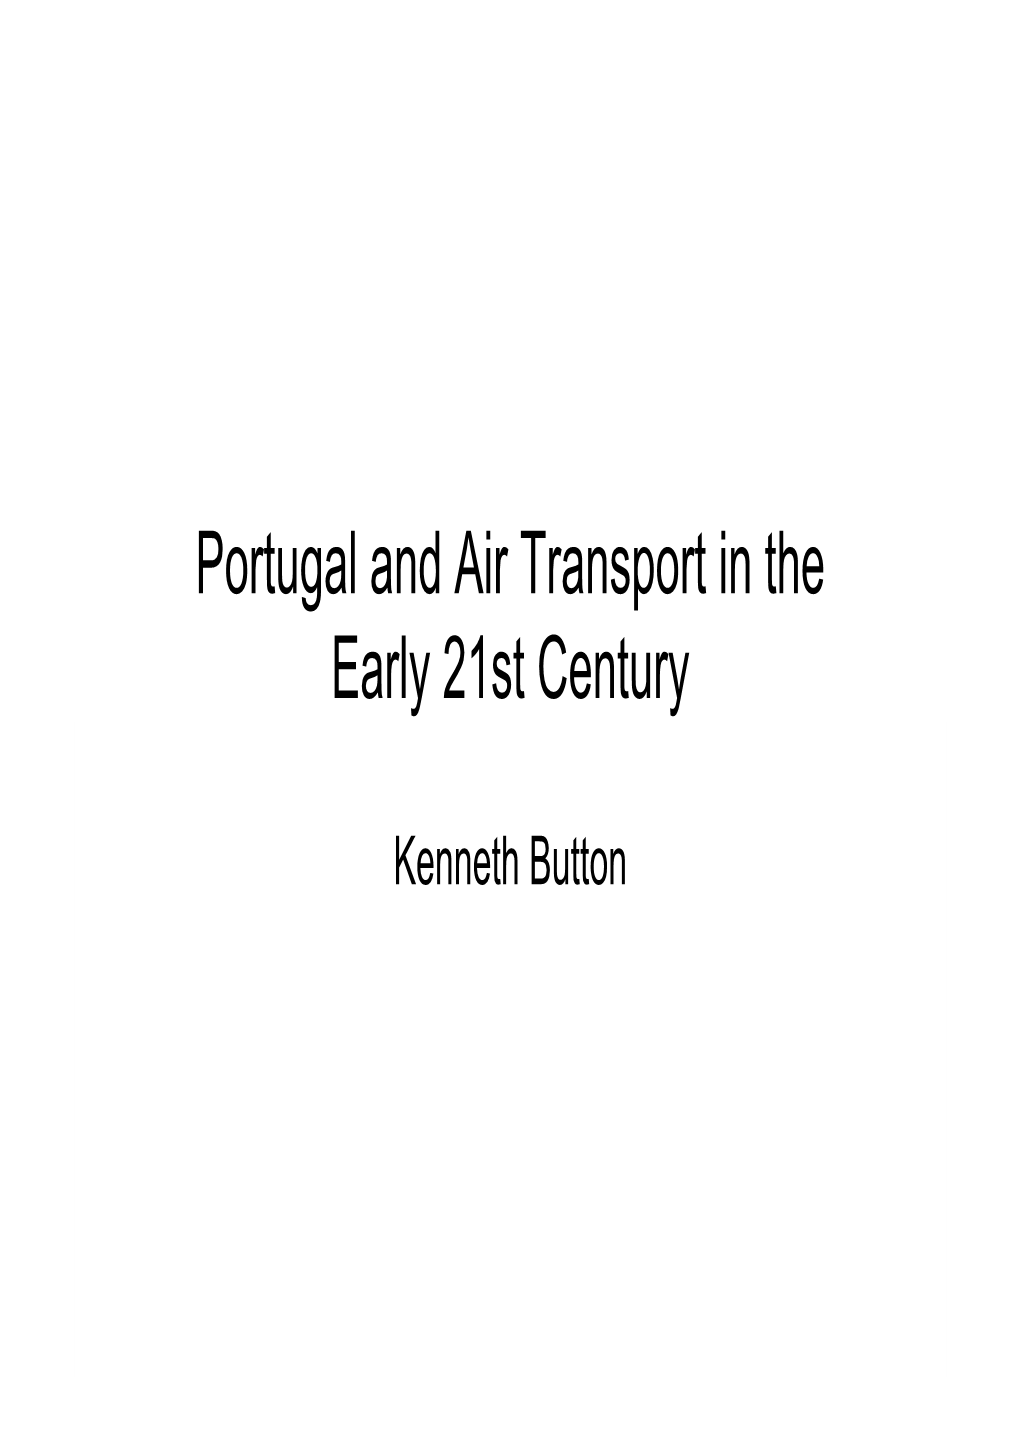 Portugal and Air Transport in the Early 21St Century